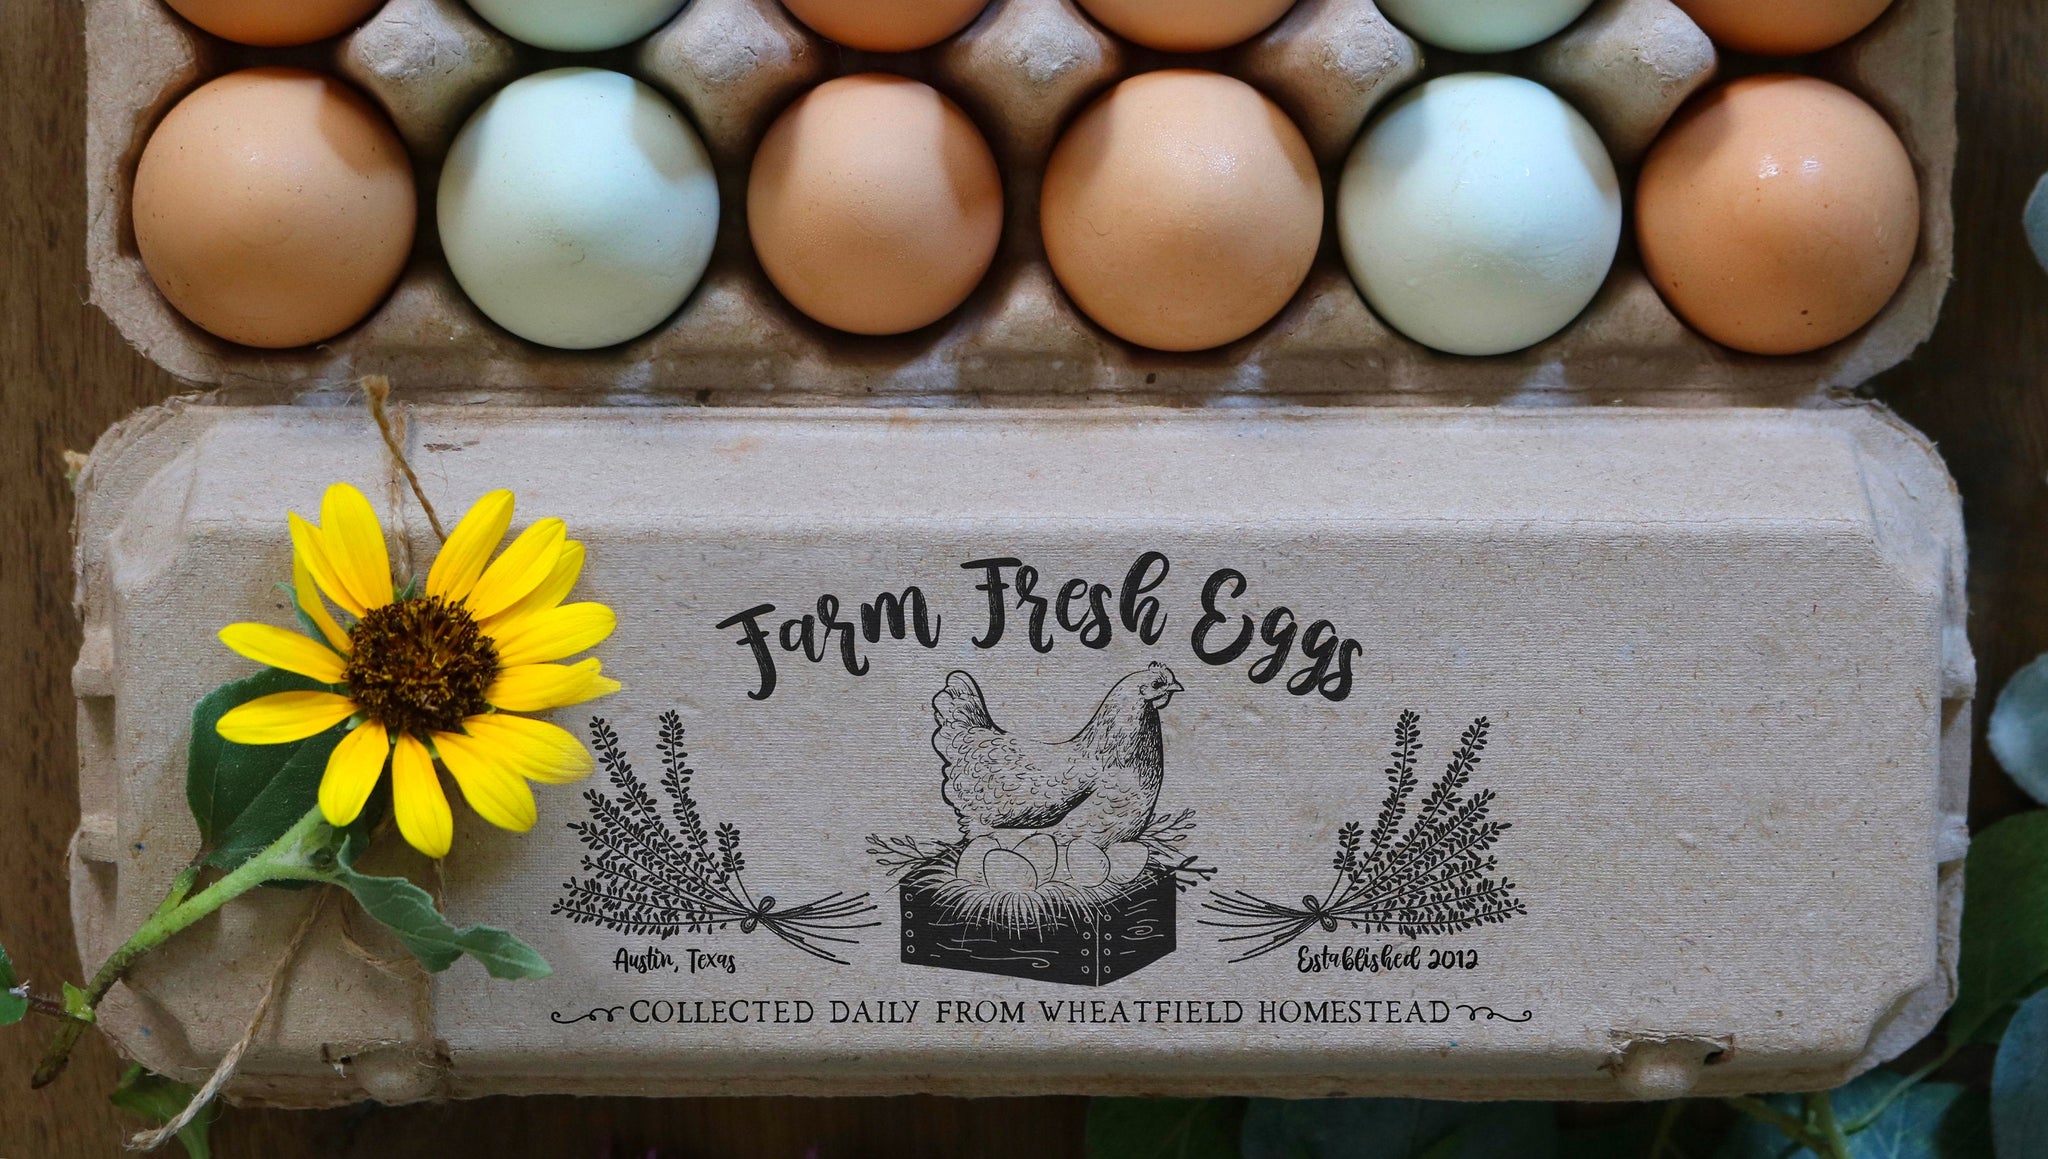 Egg Stamp Chicken Eggs Stamps, Gift for Chicken Farmer, Farm Lover Gift, Farm  Fresh Eggs Stamped Coop Accessory, Egg Rubber Stamps Hen Mom 